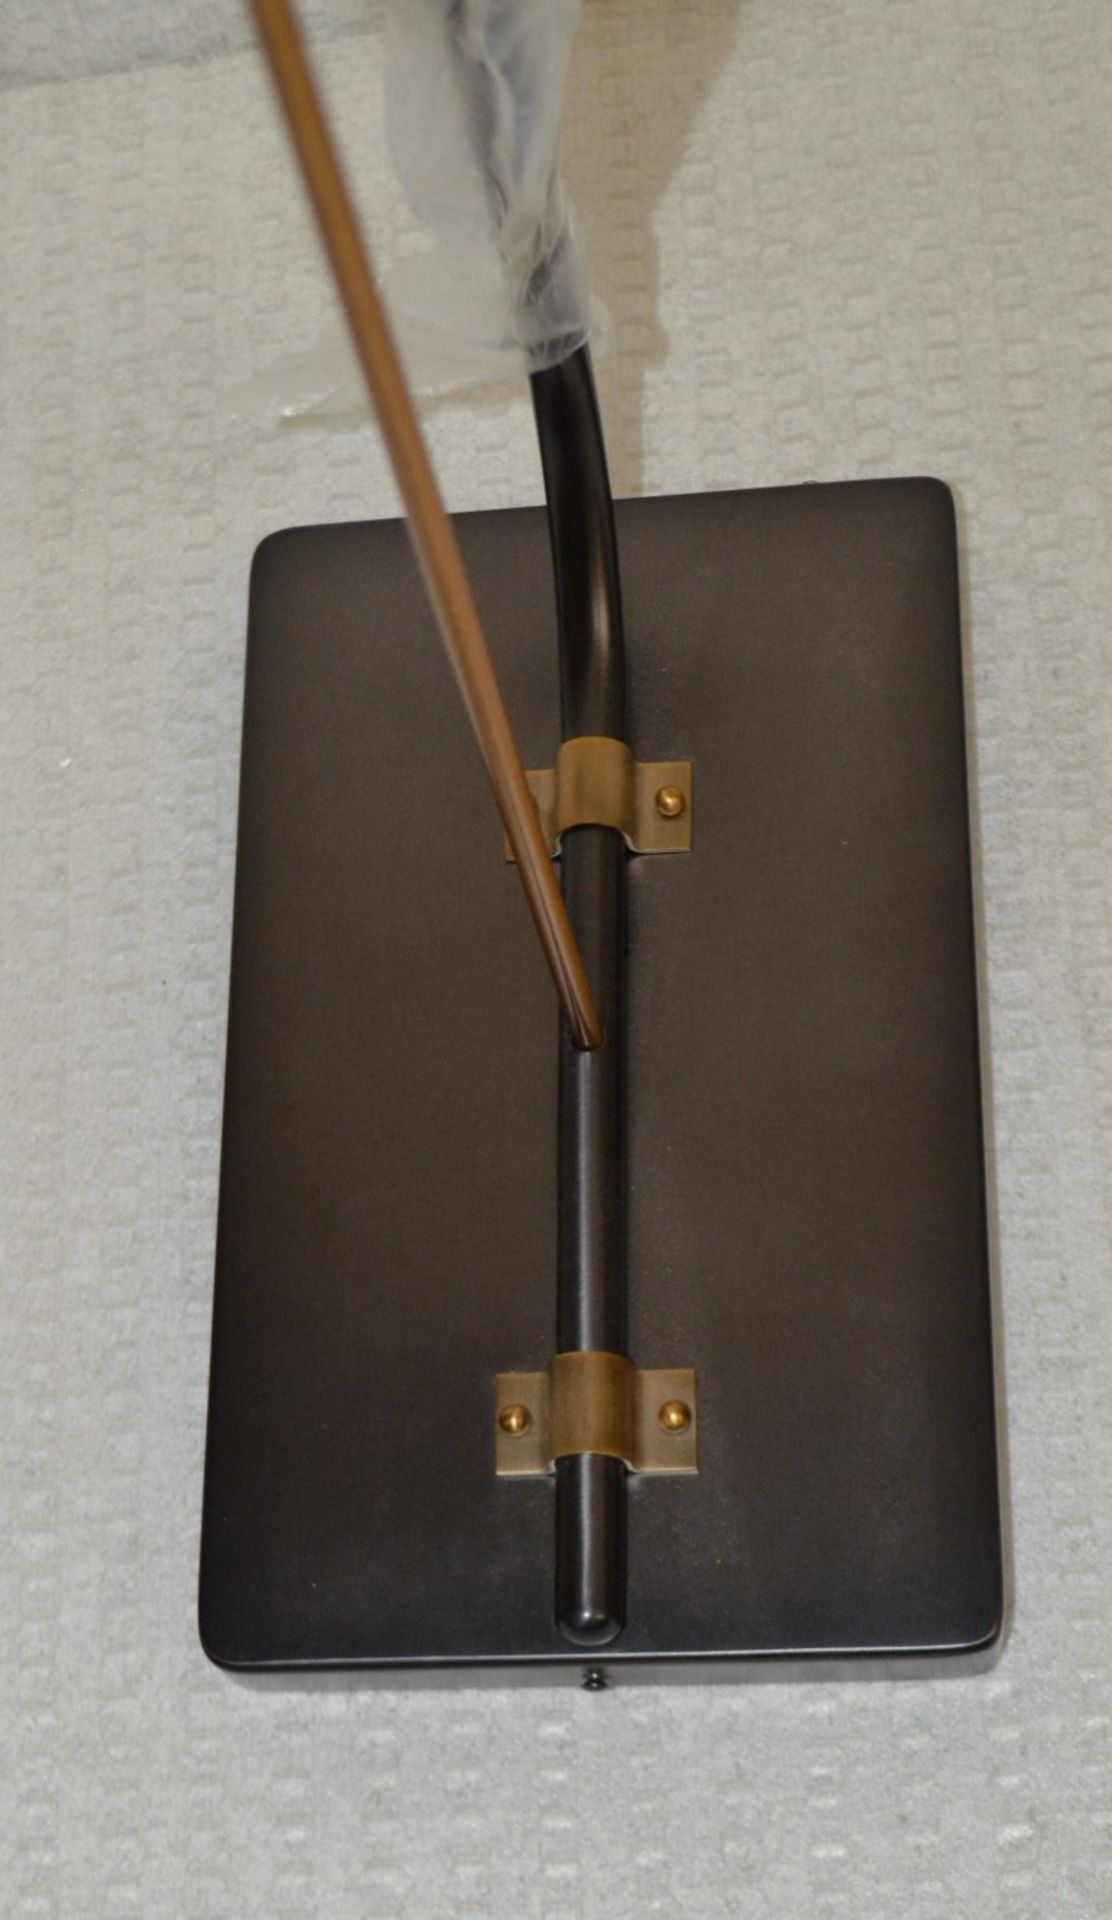 1 x CHELSOM Industrial Style Wall Light With A Back Plate In A Black Bronze Finish - Unused Boxed - Image 5 of 6